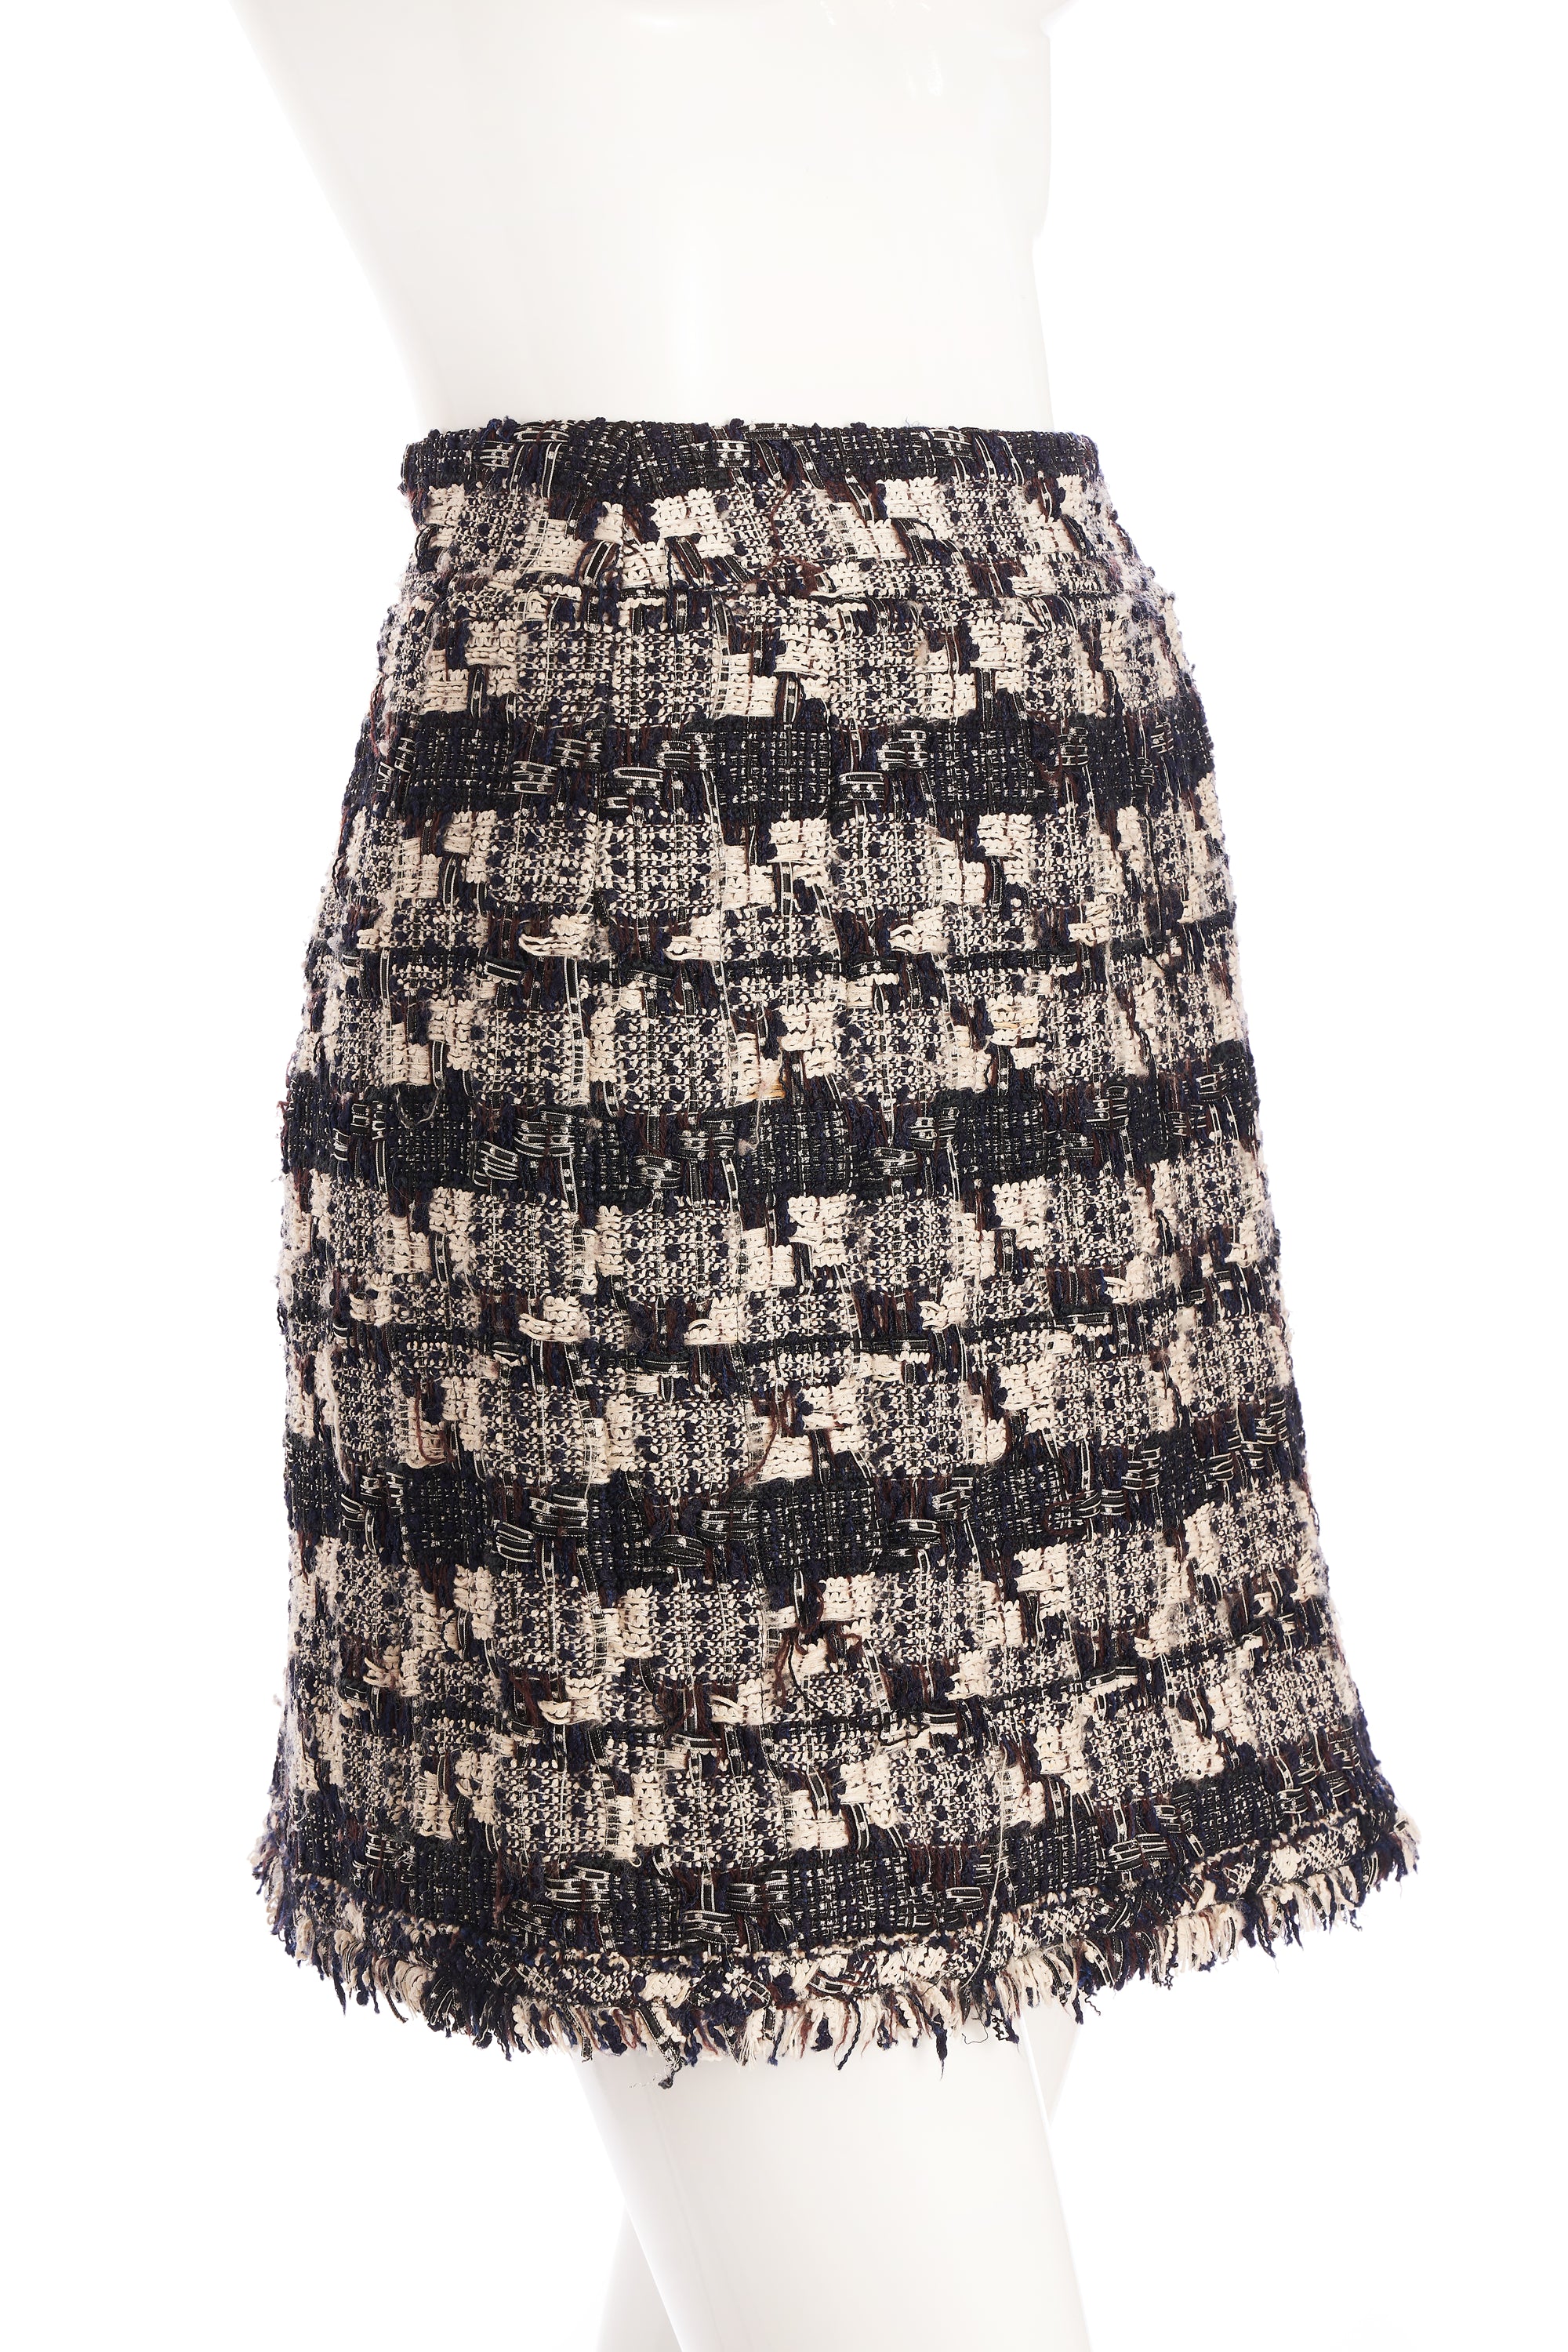 Chanel Black and White Tweed Jacket With Skirt